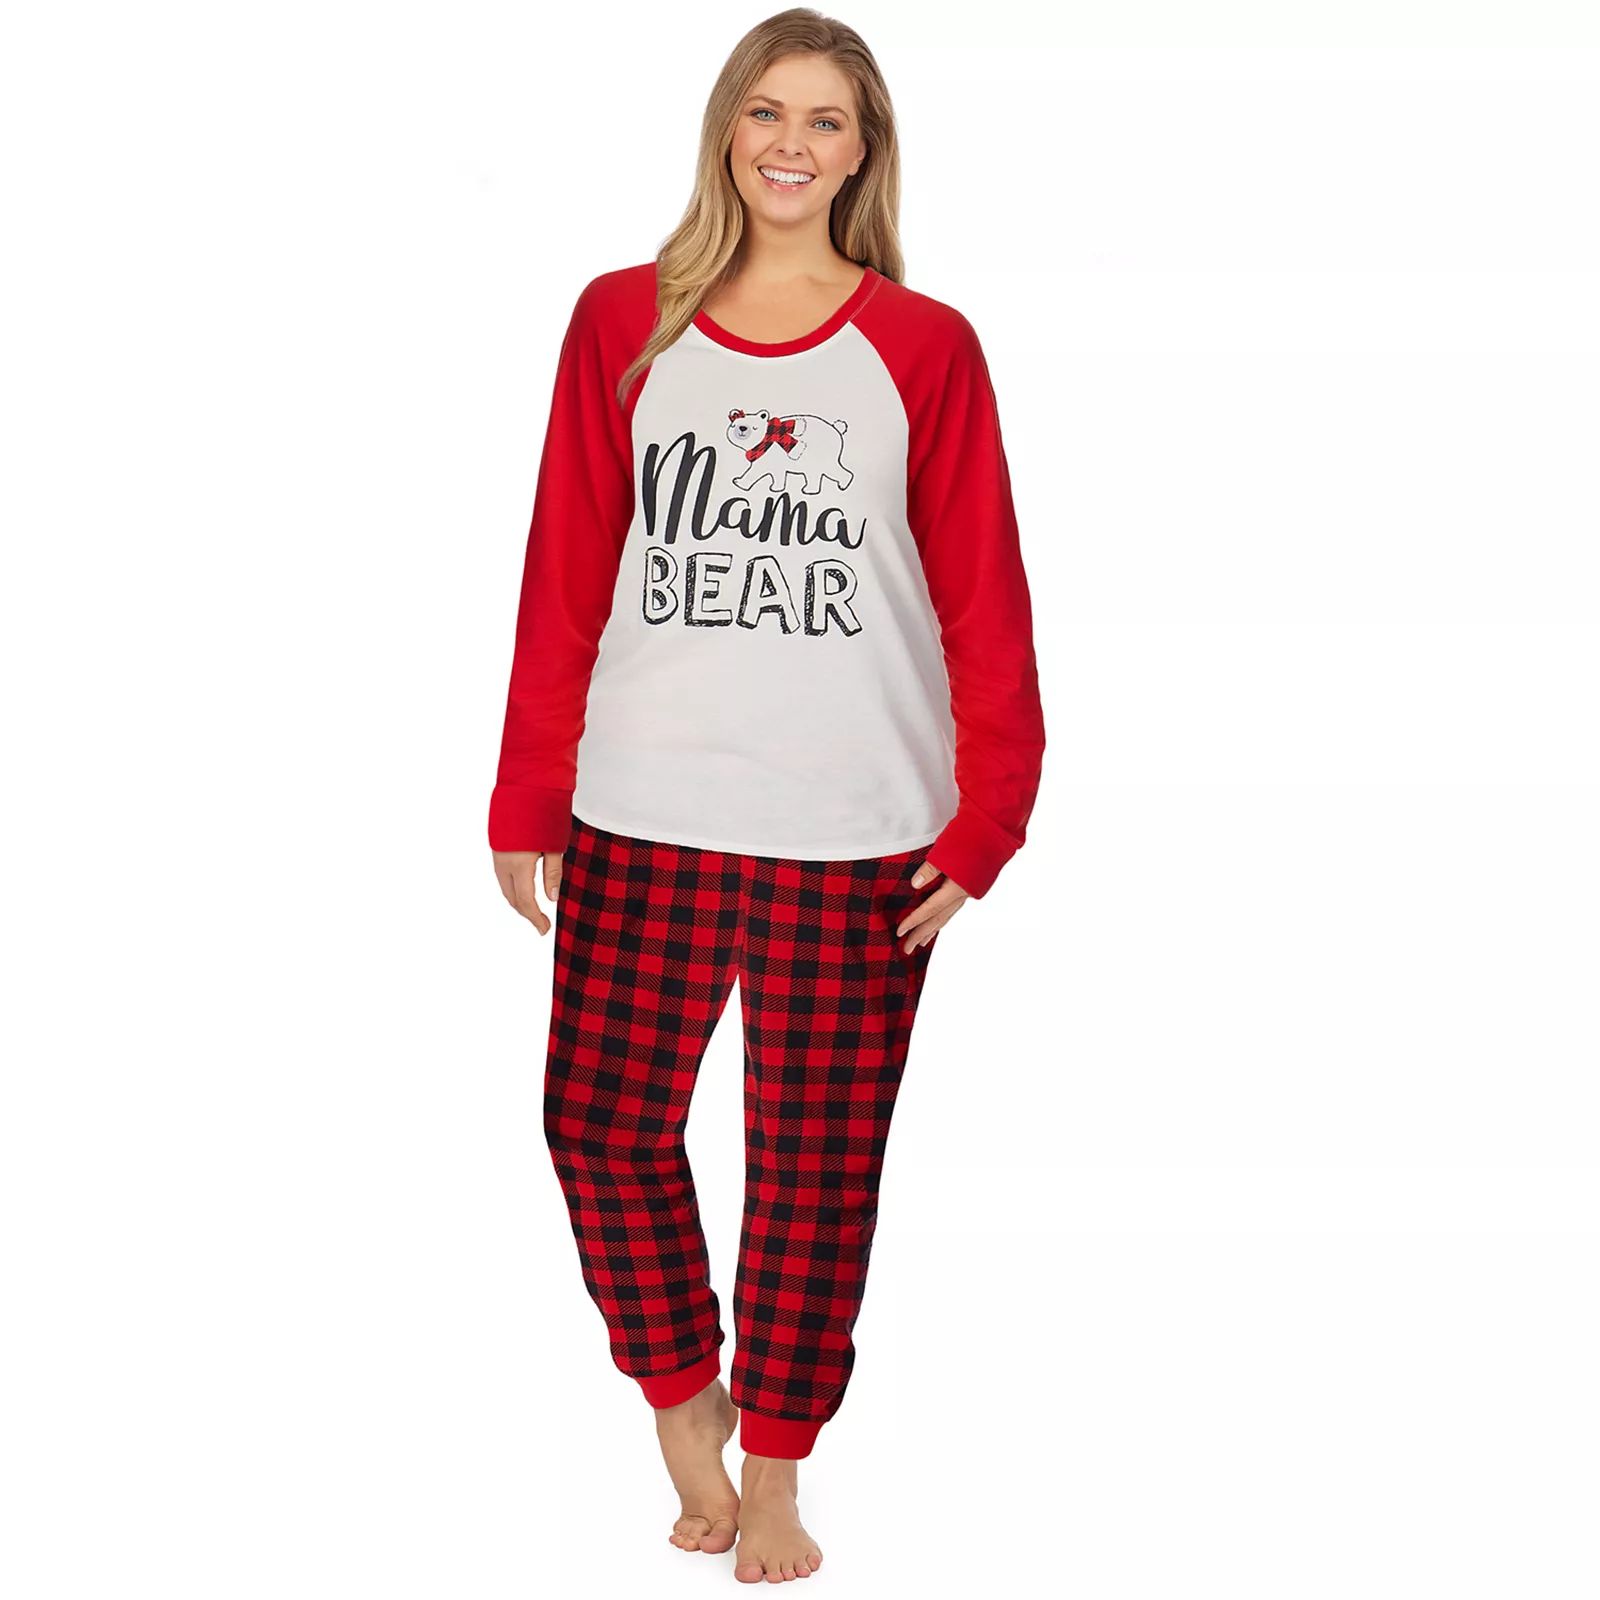 Plus Size Jammies For Your Families Cool Bear Pajama Shirt & Pajama Pants Set by Cuddl Duds, Women's | Kohl's